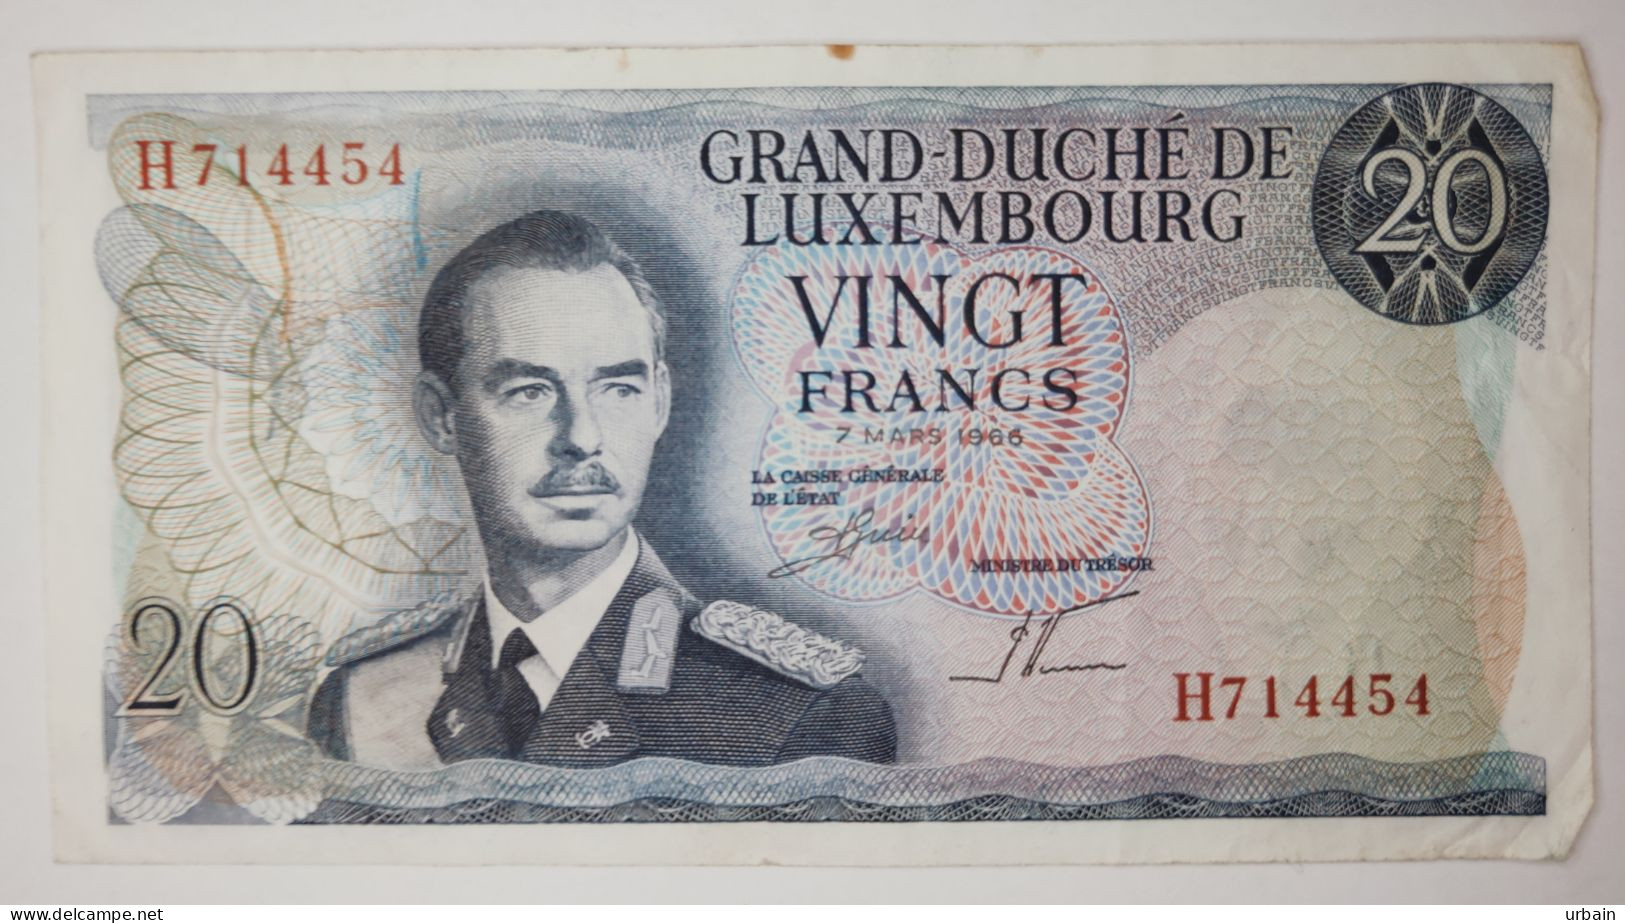 Batch Of 5 Banknotes - Luxembourg - 20 Francs - 7 Mars 1966 - Luxemburgo